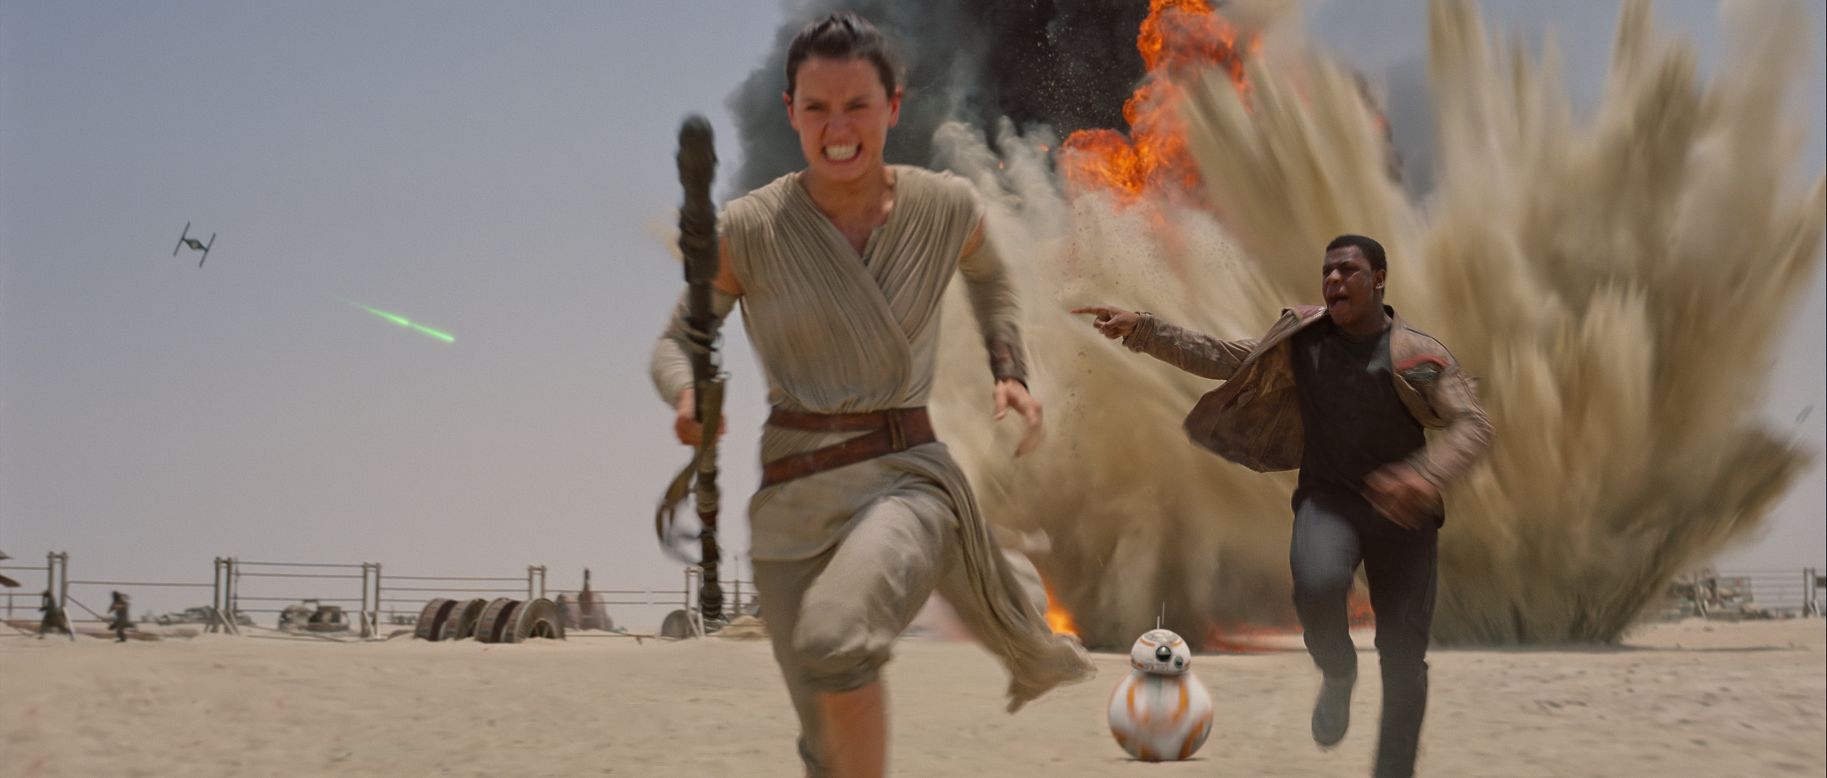 Daisy Ridley portrays the female lead of the movie, Rey, who is often accompanied by her droid BB-8, an early fan favorite.